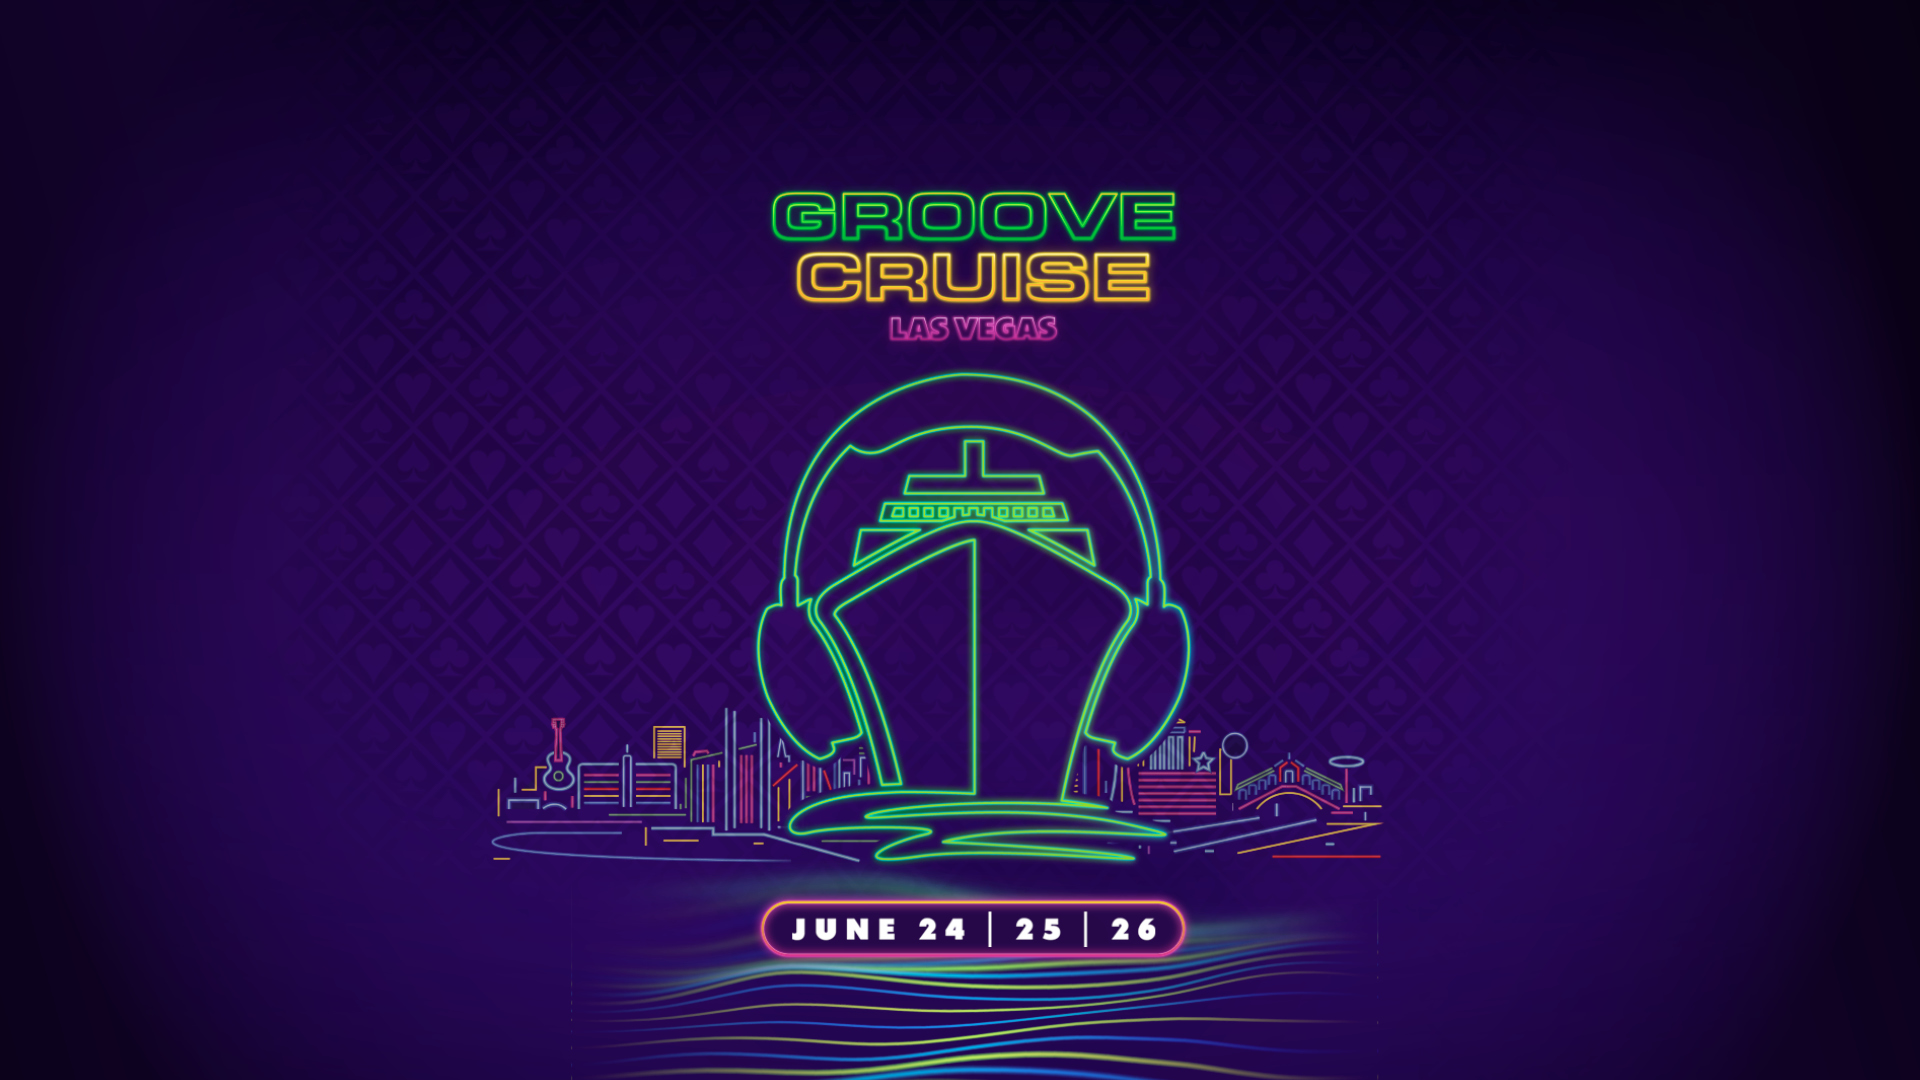 Groove Cruise Visual. This shows a cruise ship with headphones on and june 24, 25 and june 26